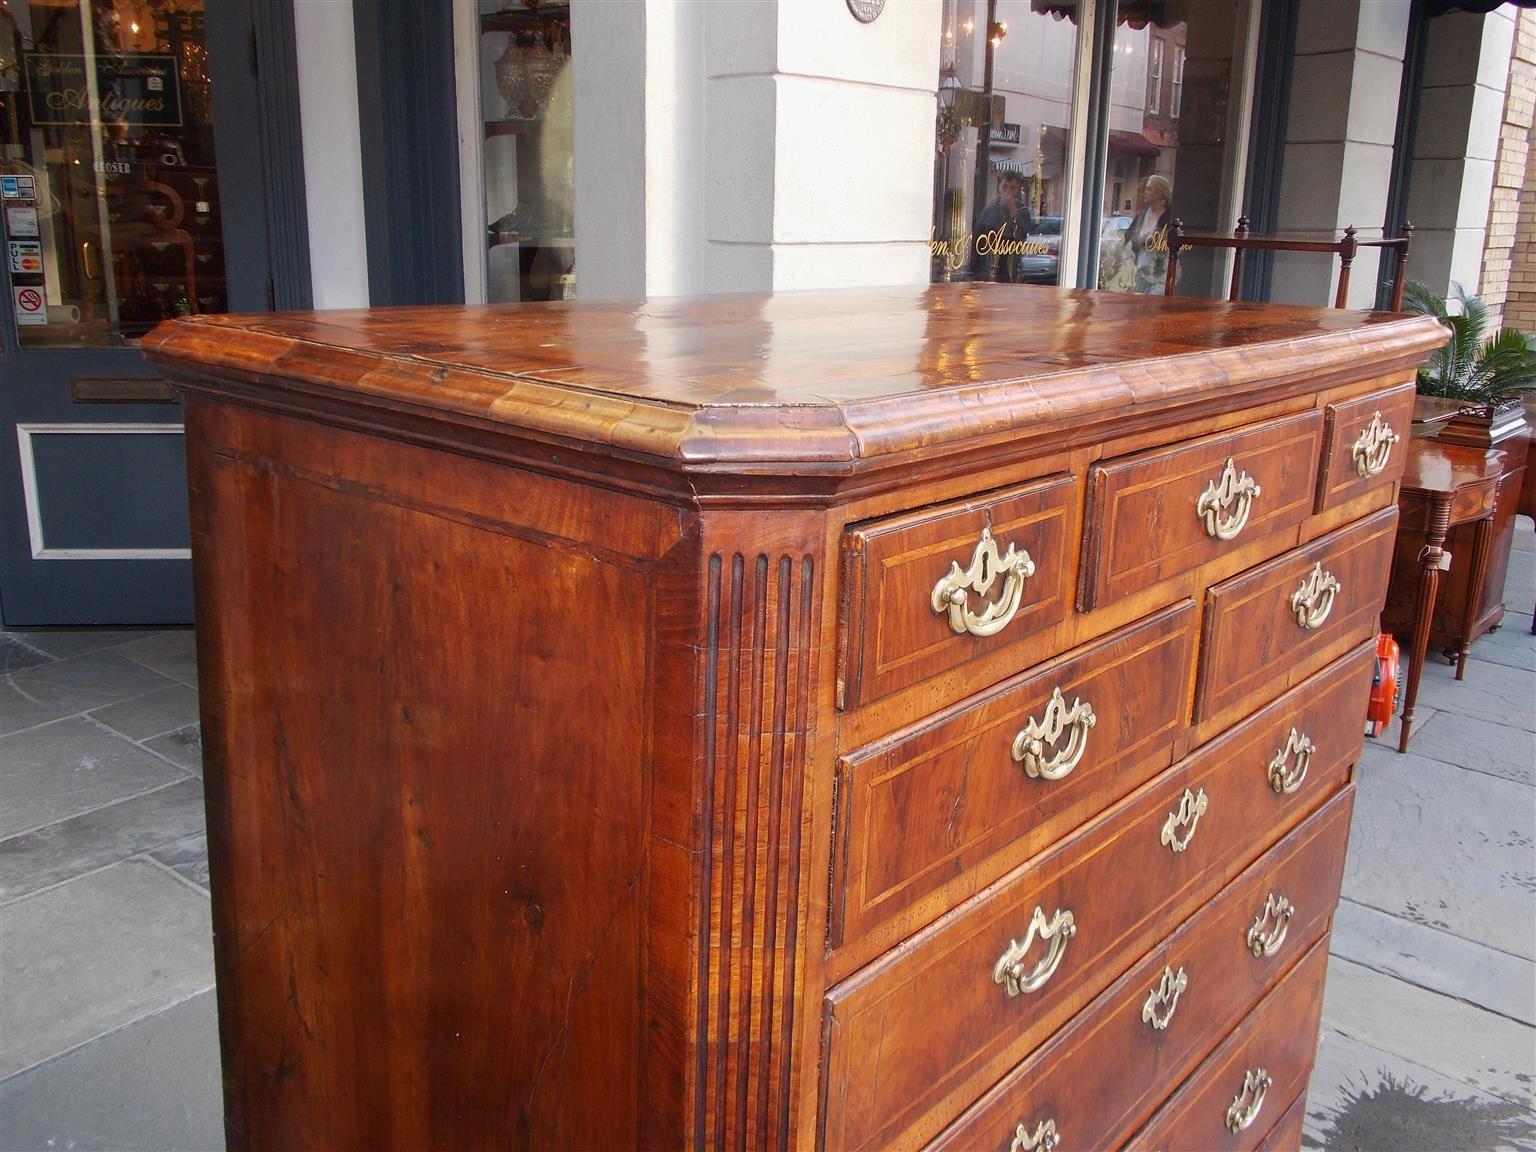 George II English Chippendale Burl Walnut Tall Chest with Hearing Bone Inlays, Circa 1740 For Sale